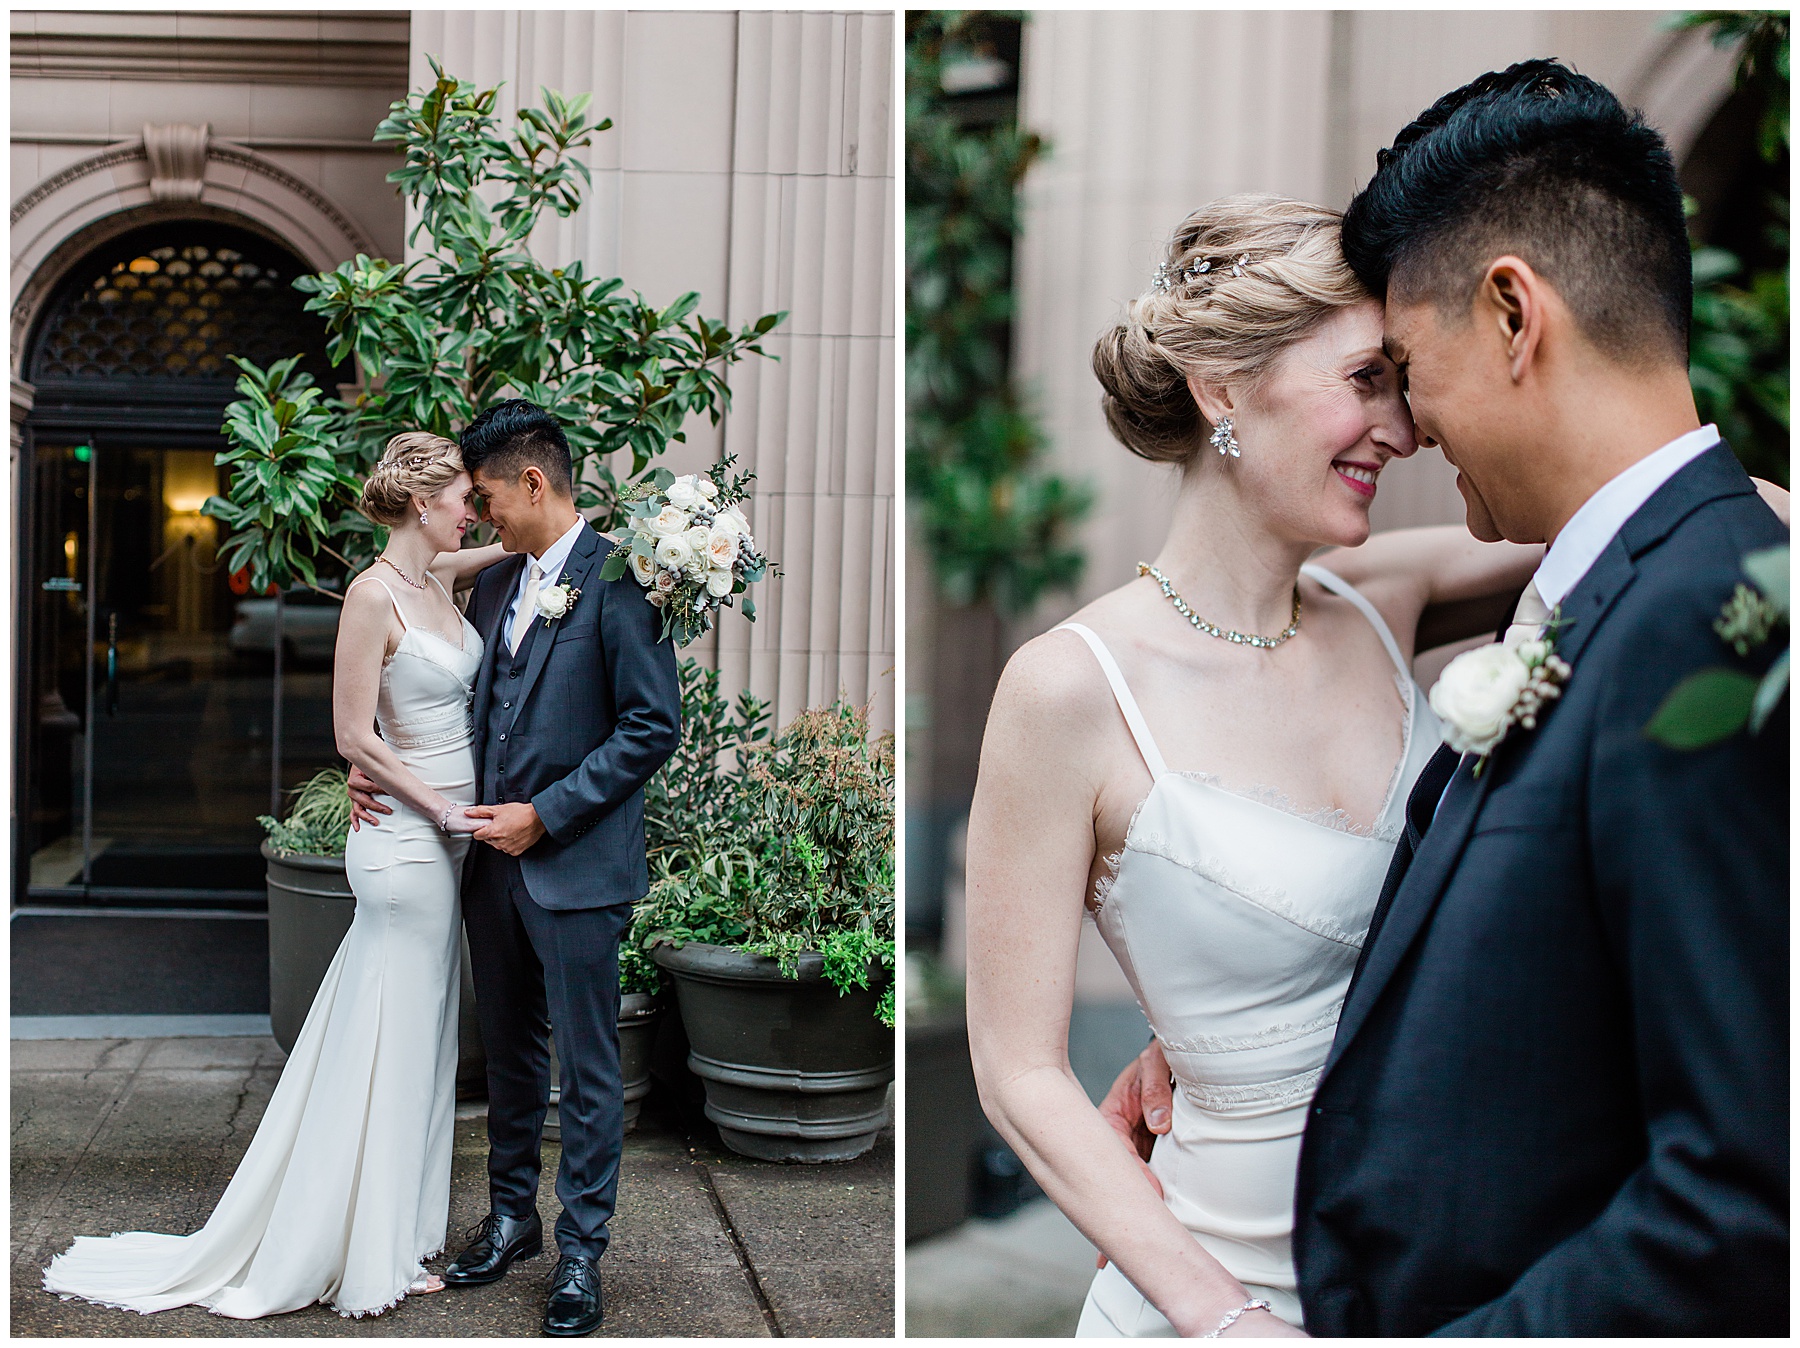 romantic wedding portraits outside the Sentinel hotel in downtown portland oregon. the couple is wearing vintage silk attire.